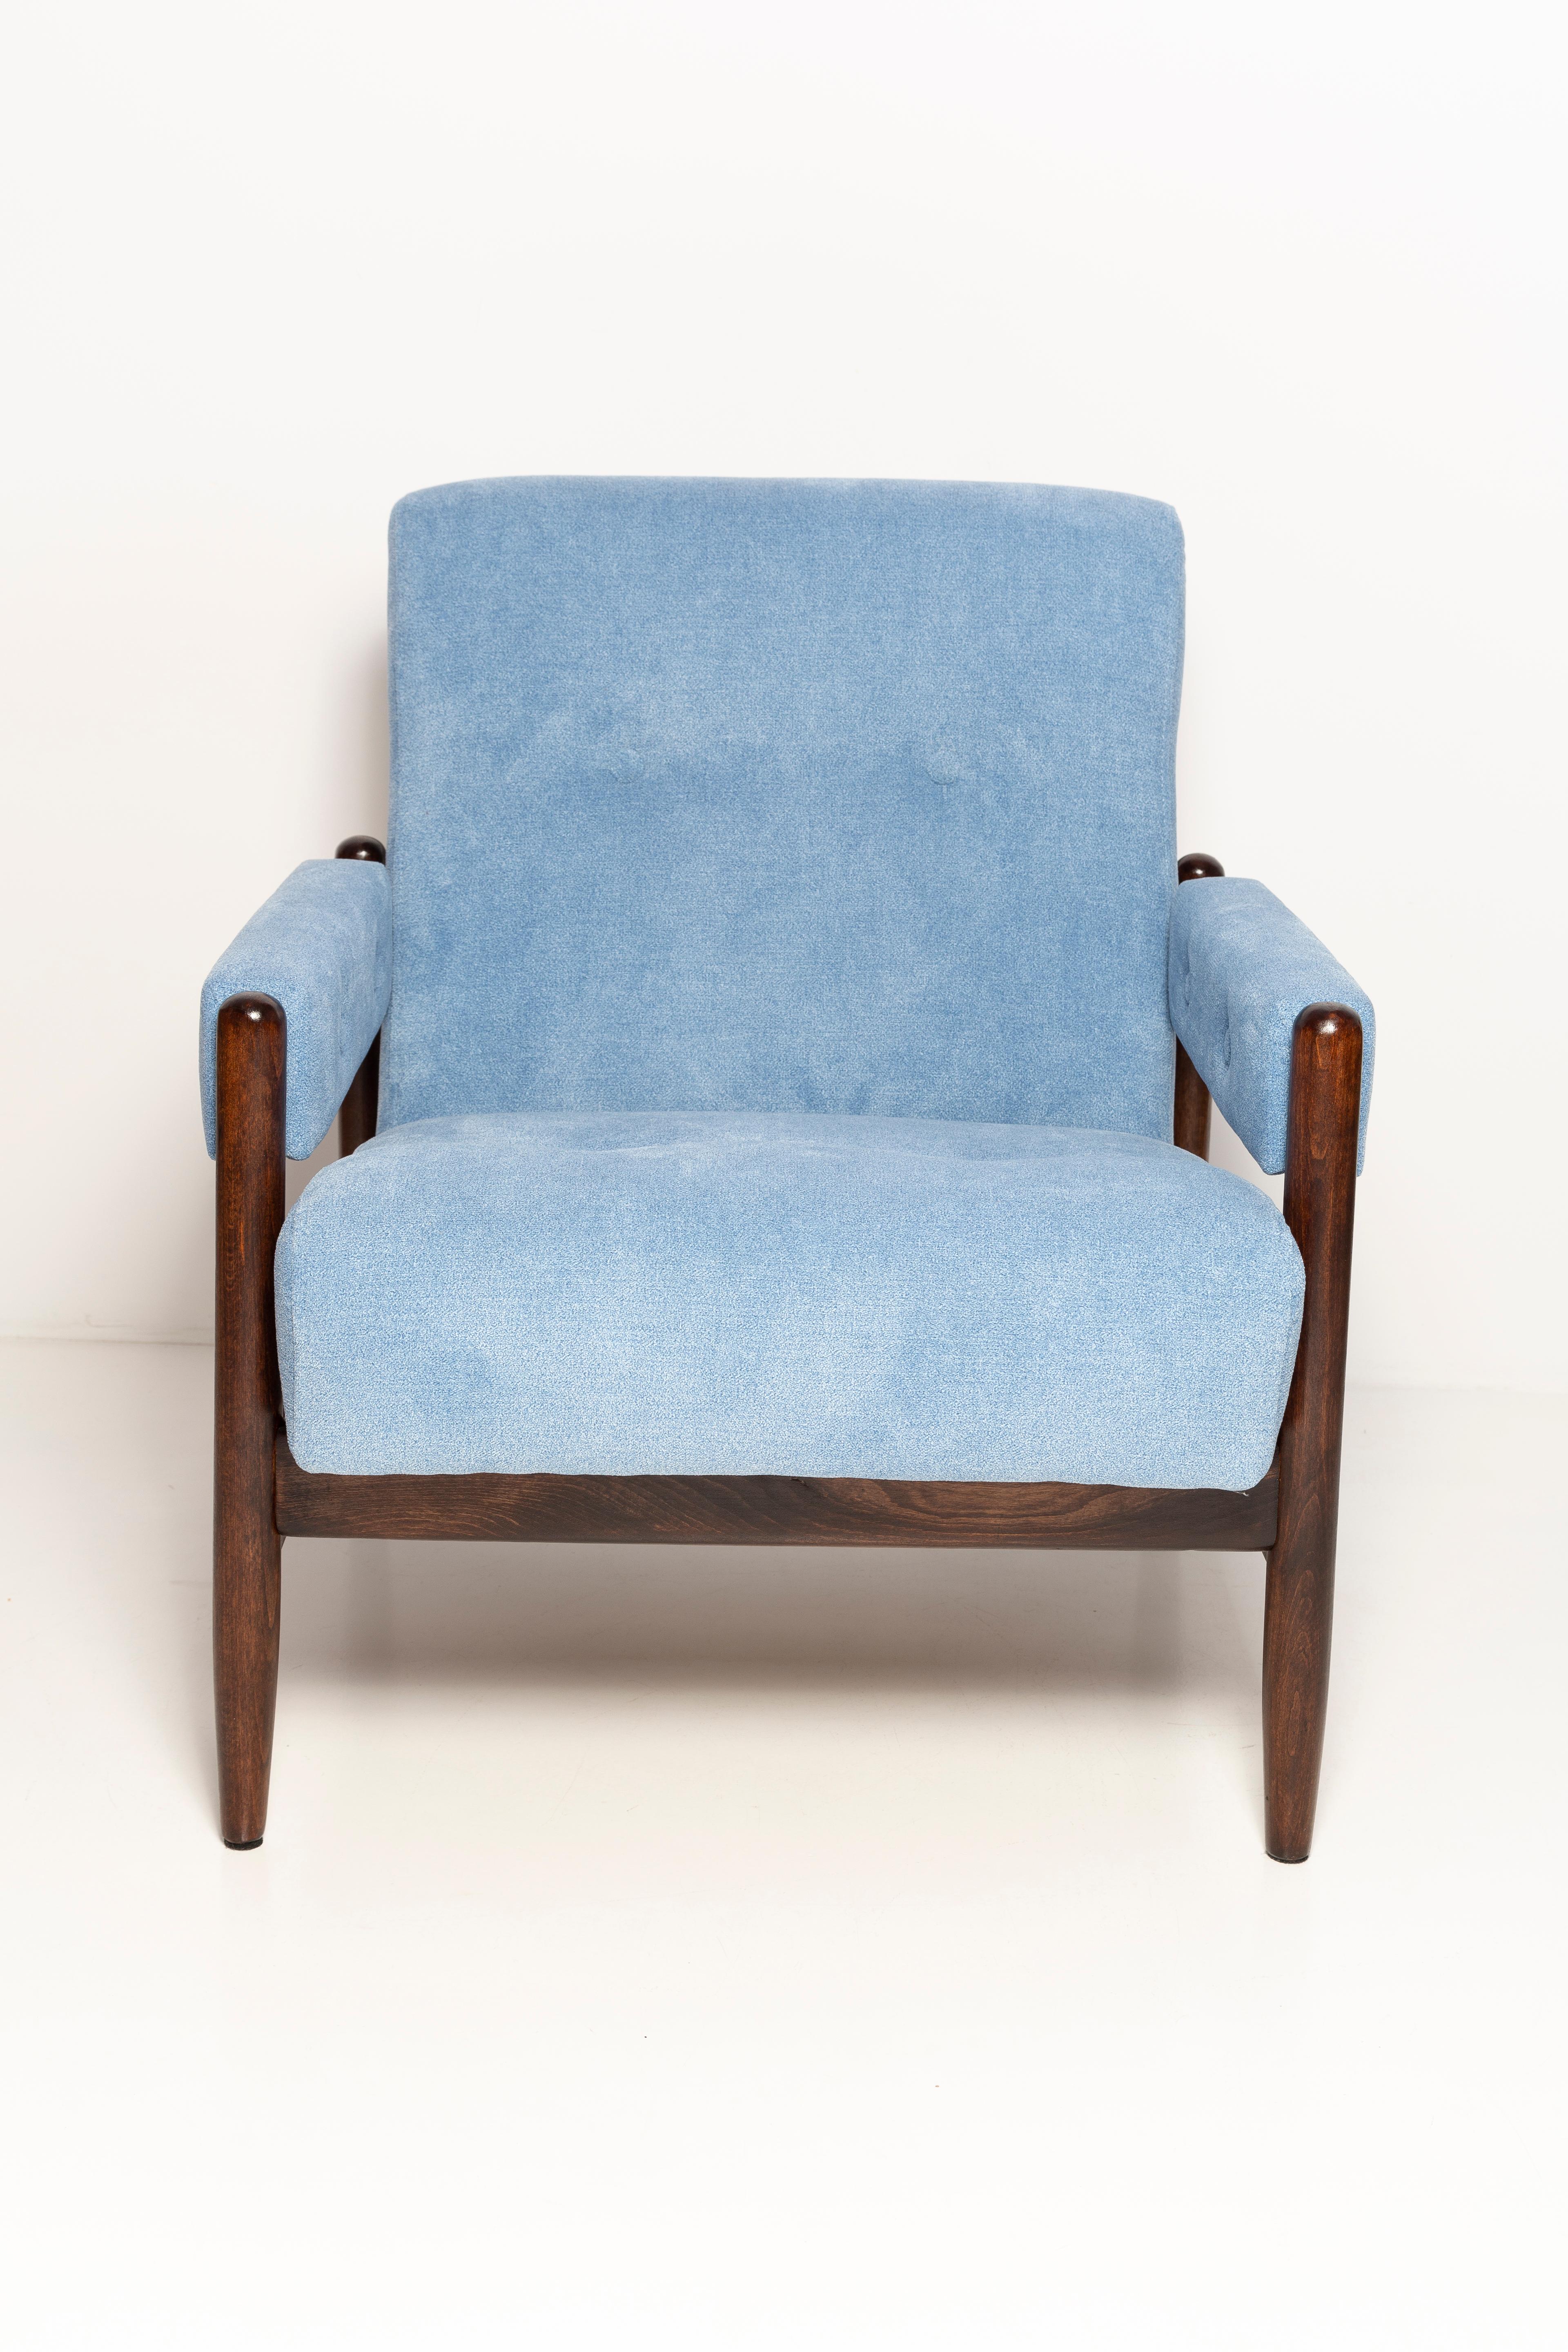 Hand-Crafted Set of Two Mid Century Blue Velvet Vintage Armchairs, Walnut Wood, Europe, 1960s For Sale